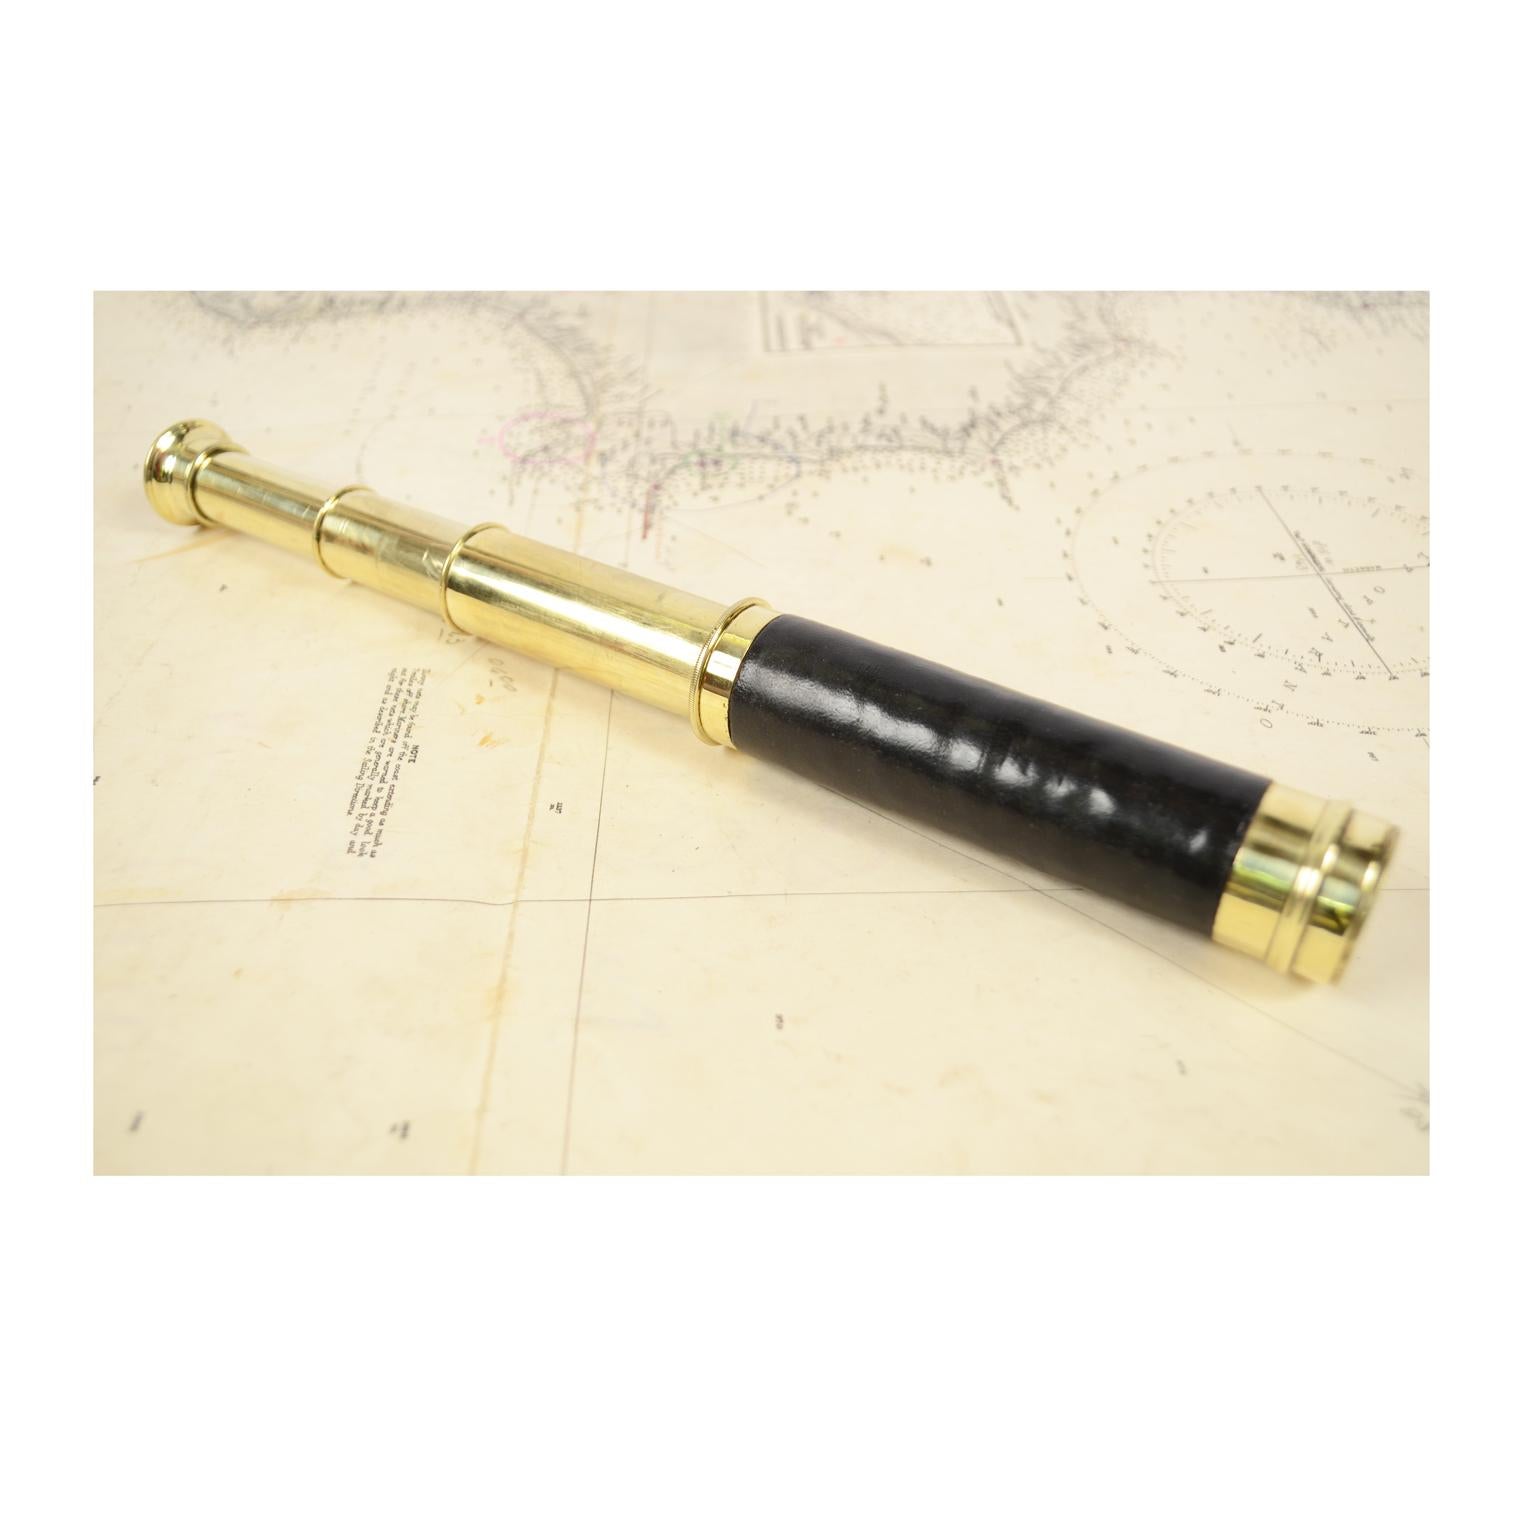 Small brass telescope with black leather covered handle, three-extension focus. French manufacture from the second half of the nineteenth century. Maximum length 42 cm, minimum 14.5 cm, focal diameter 3 cm. Perfectly working condition, complete with